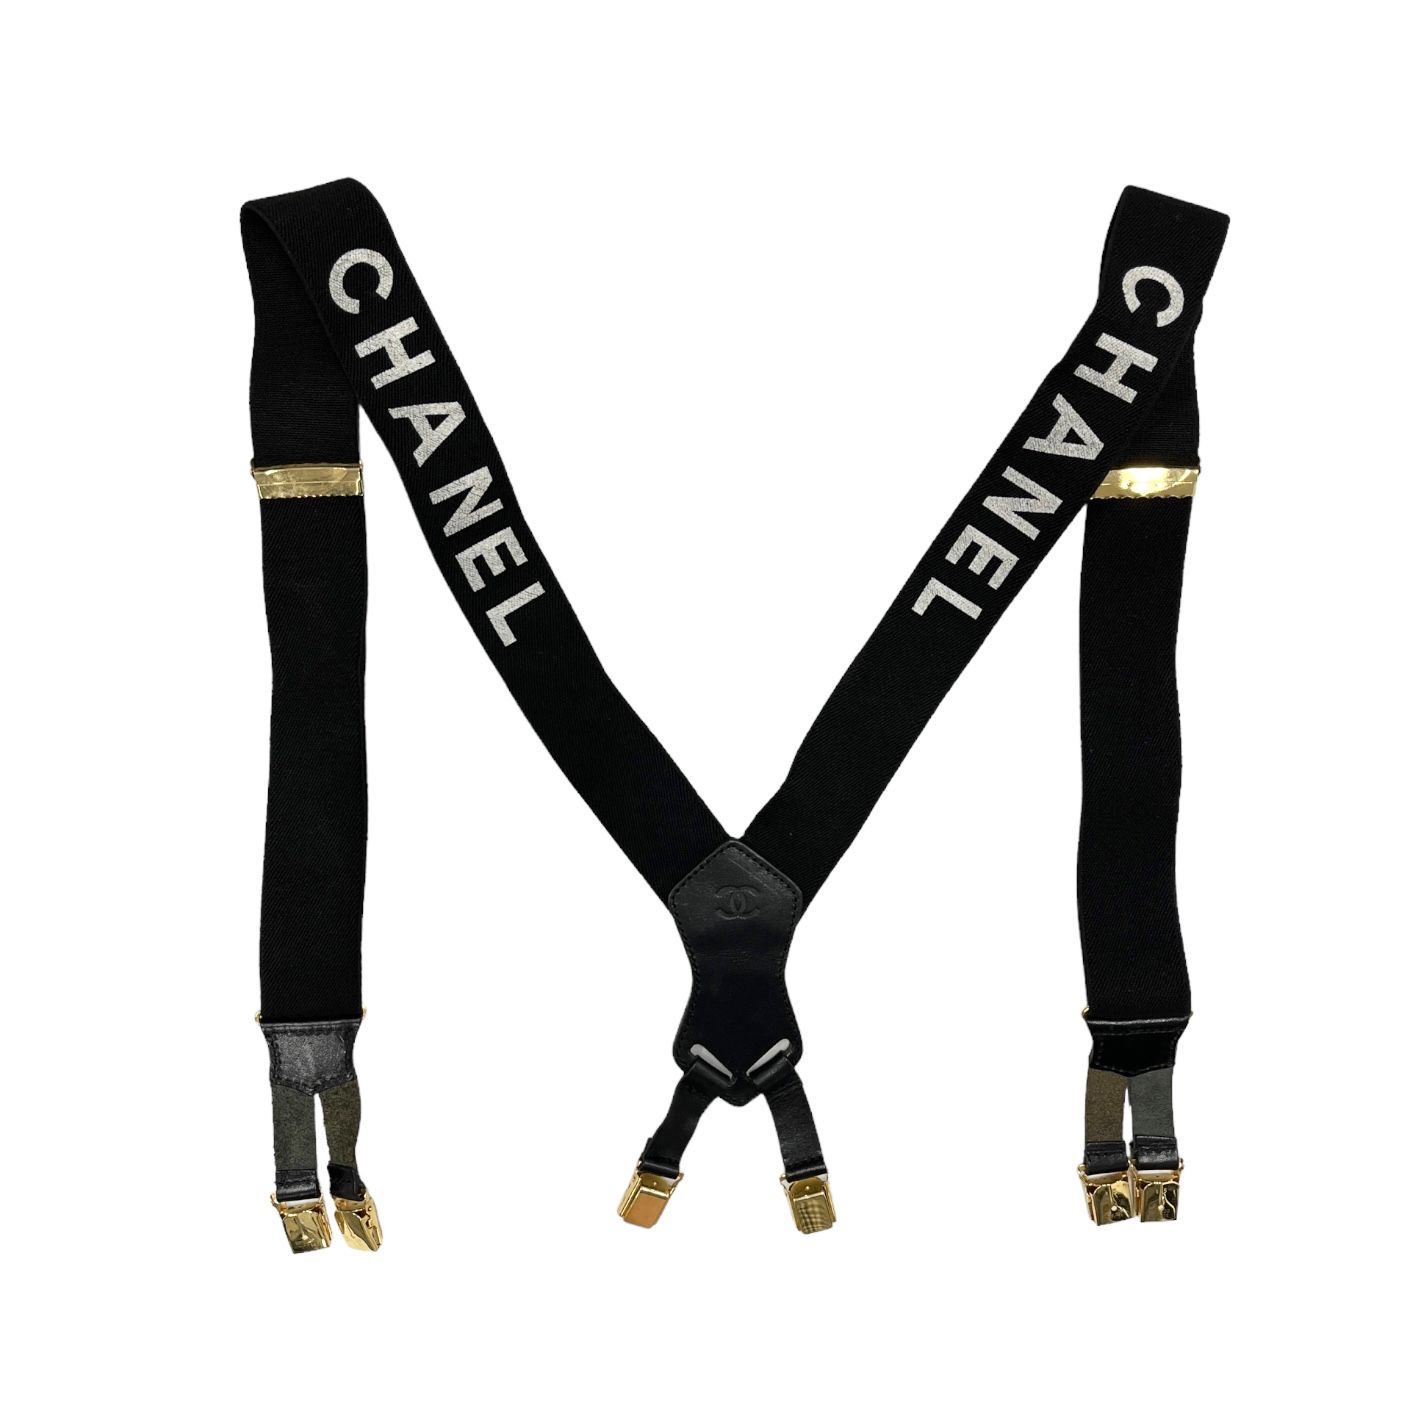 CHANEL Logo Used Suspender Black Sewing Elastic Leather Vintage Auth #CJ416  S